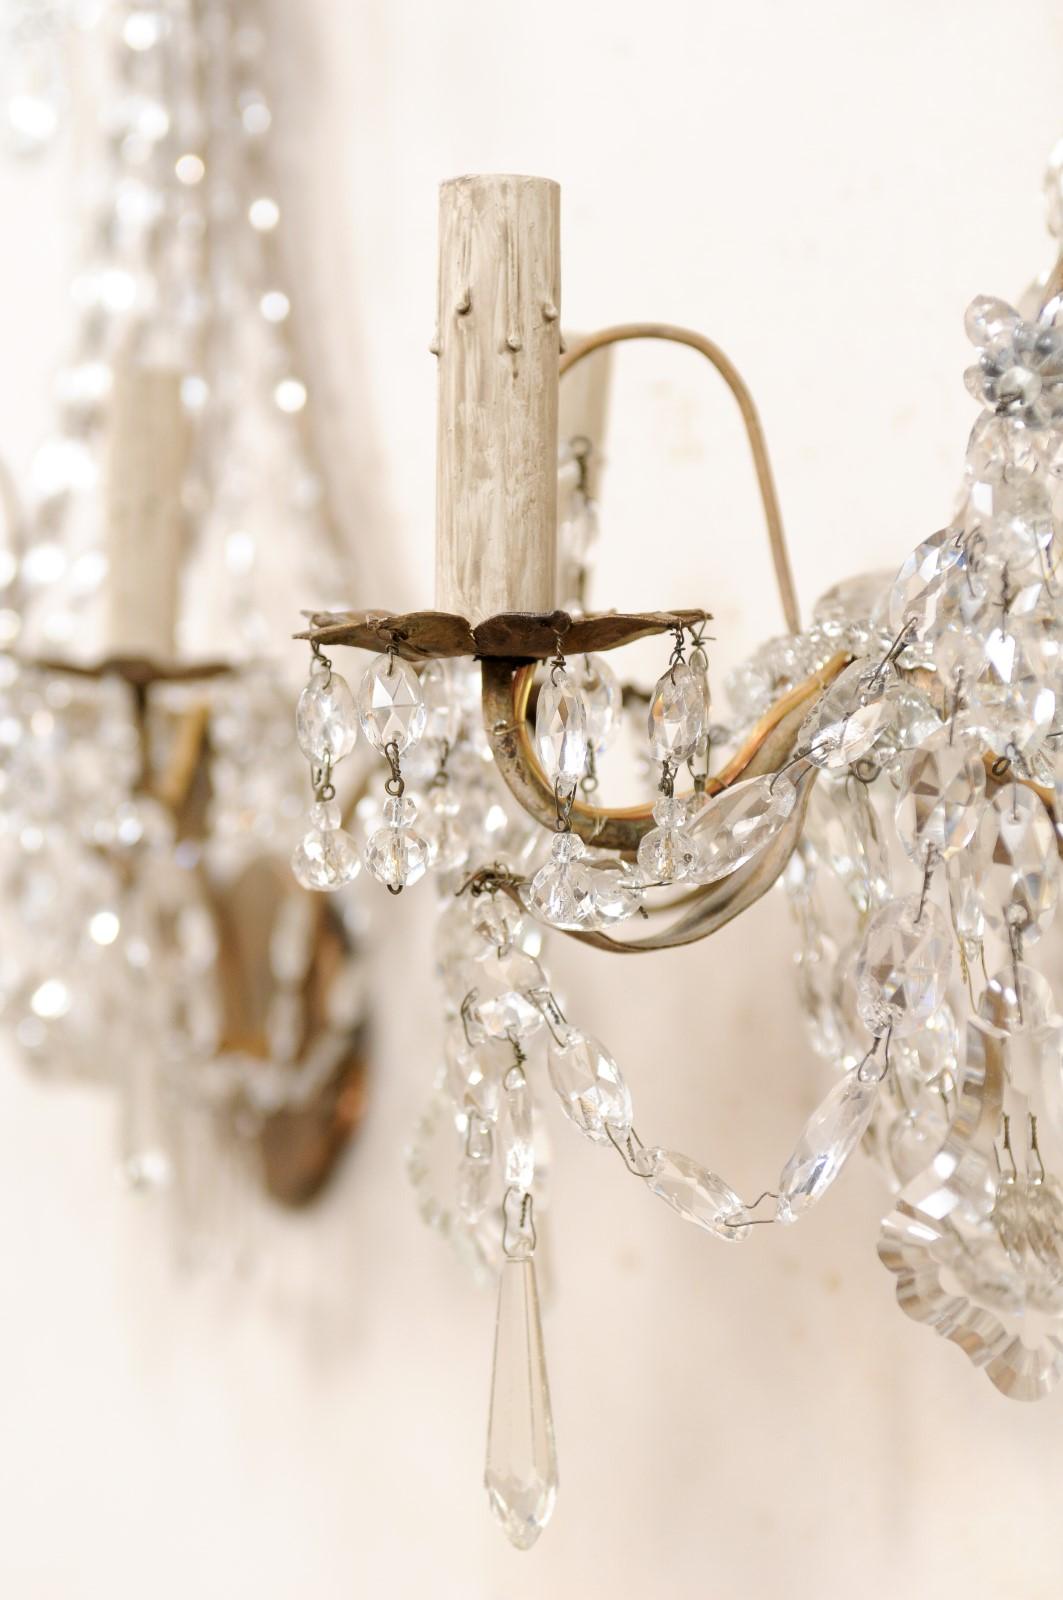 Elegant Pair of Mid-20th Century Crystal Waterfall Wall Sconces from France For Sale 2